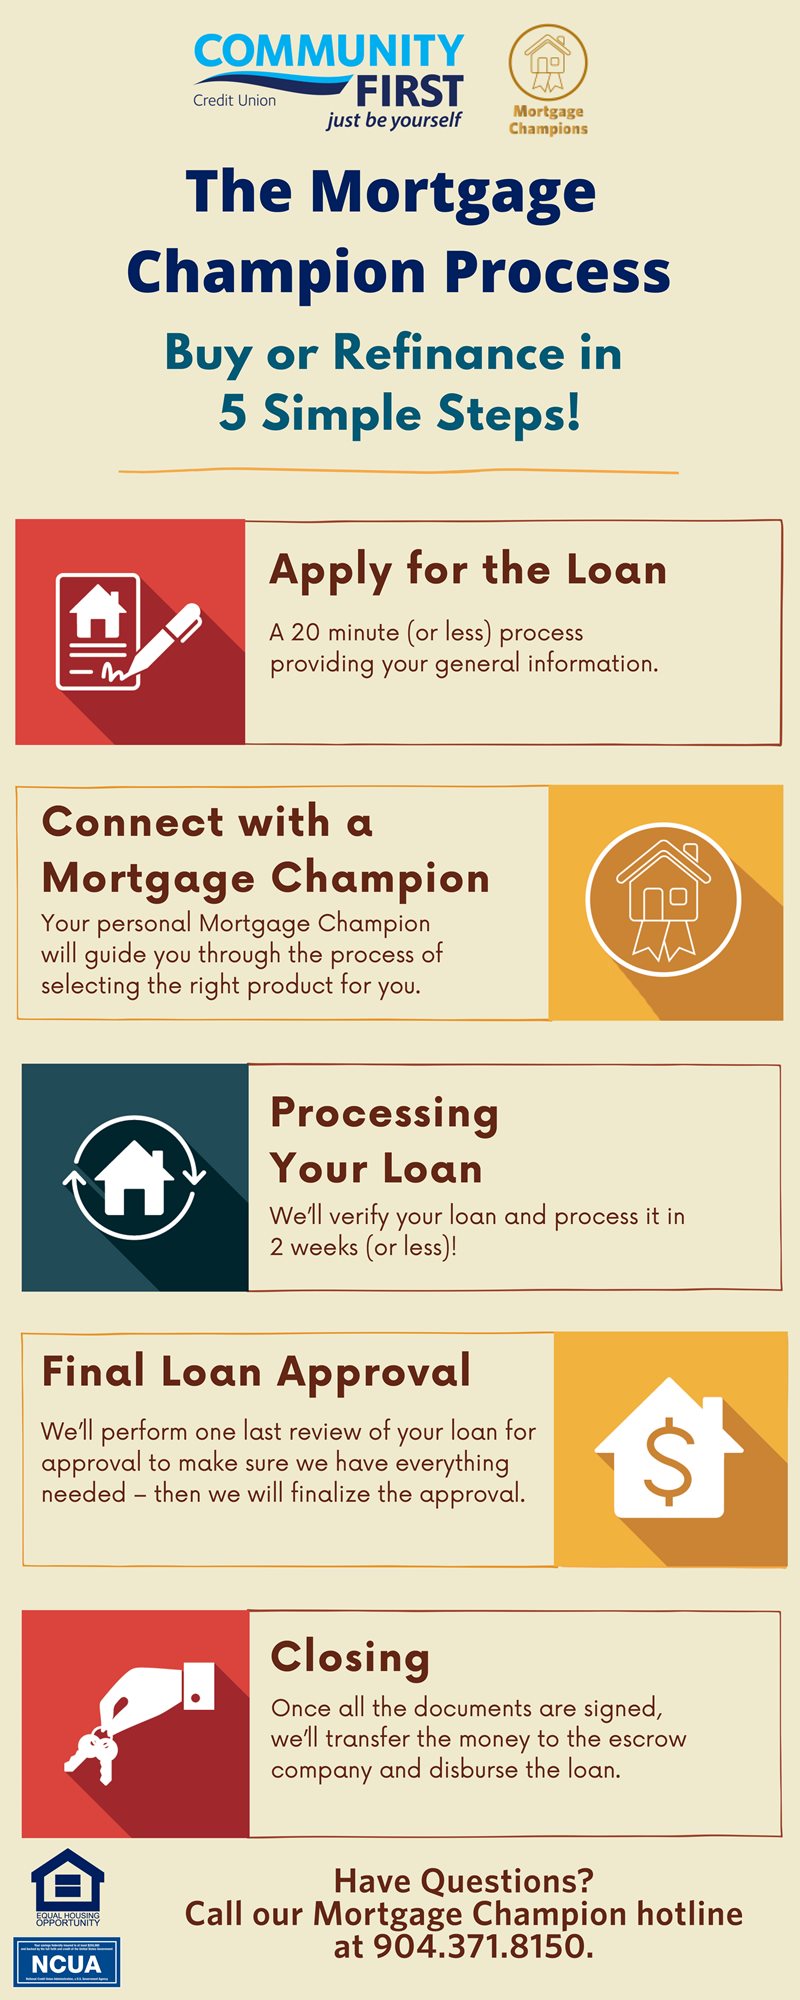 the mortgage champion process - buy or refinance in 5 simple steps